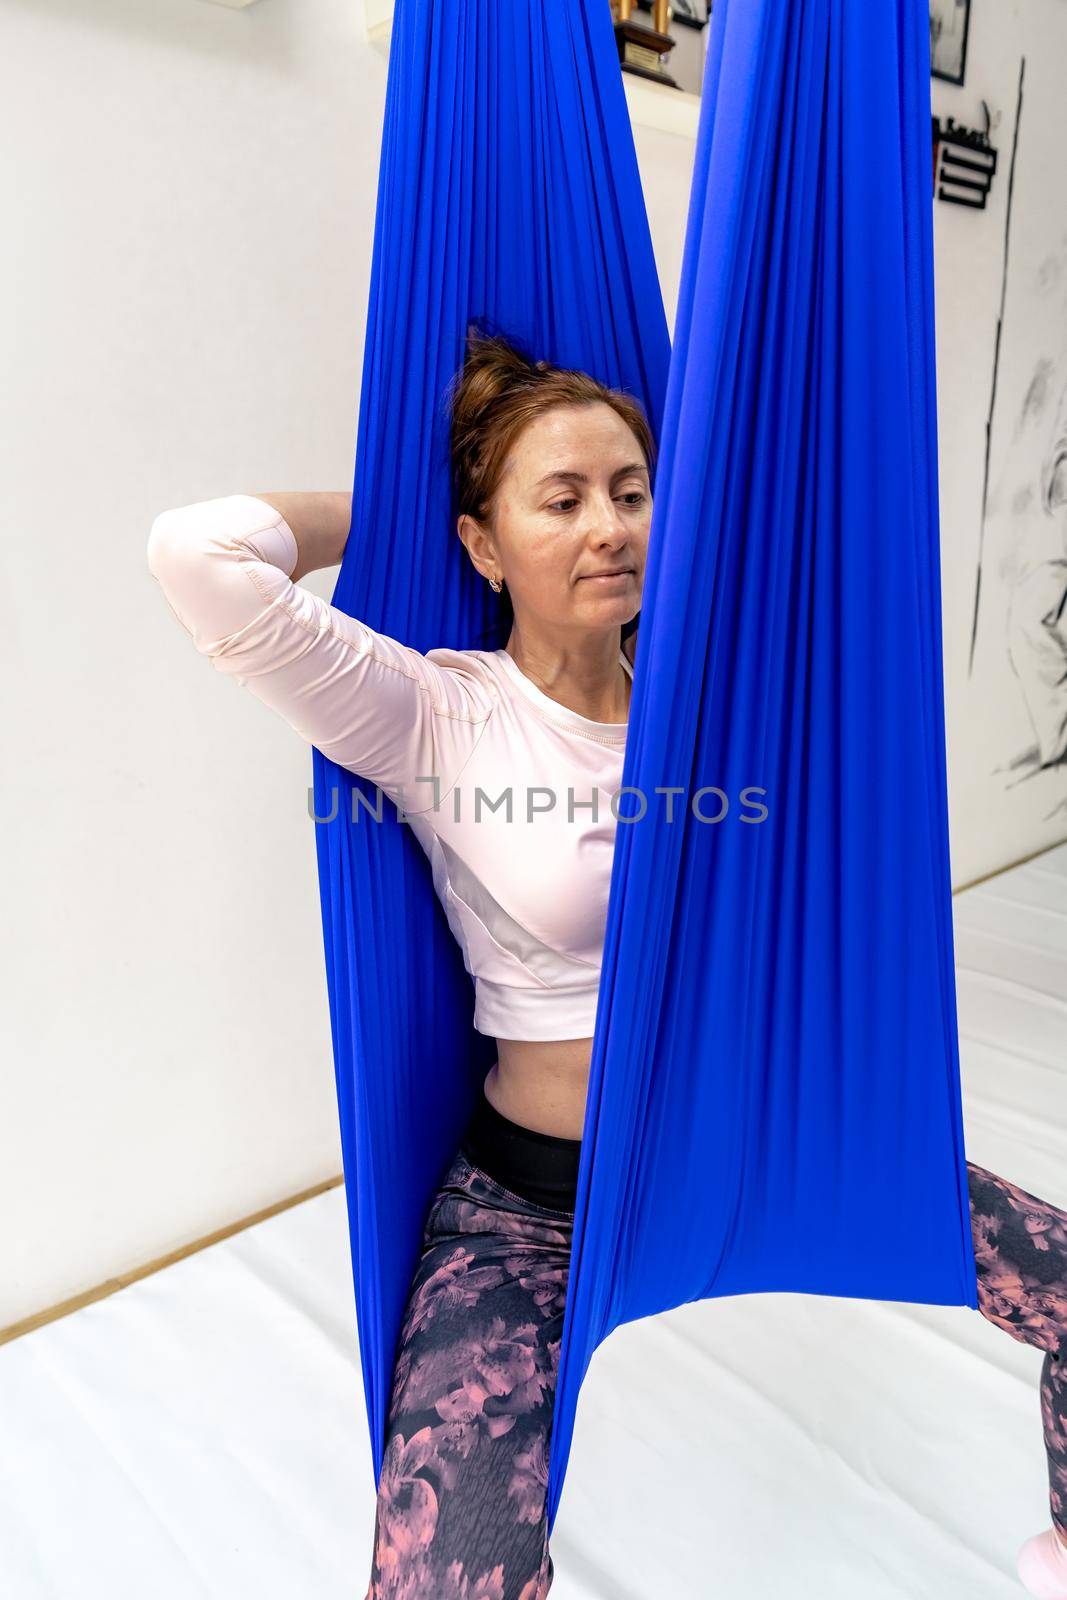 A young woman poses while doing anti-gravity aerial yoga in a blue hammock on a white background